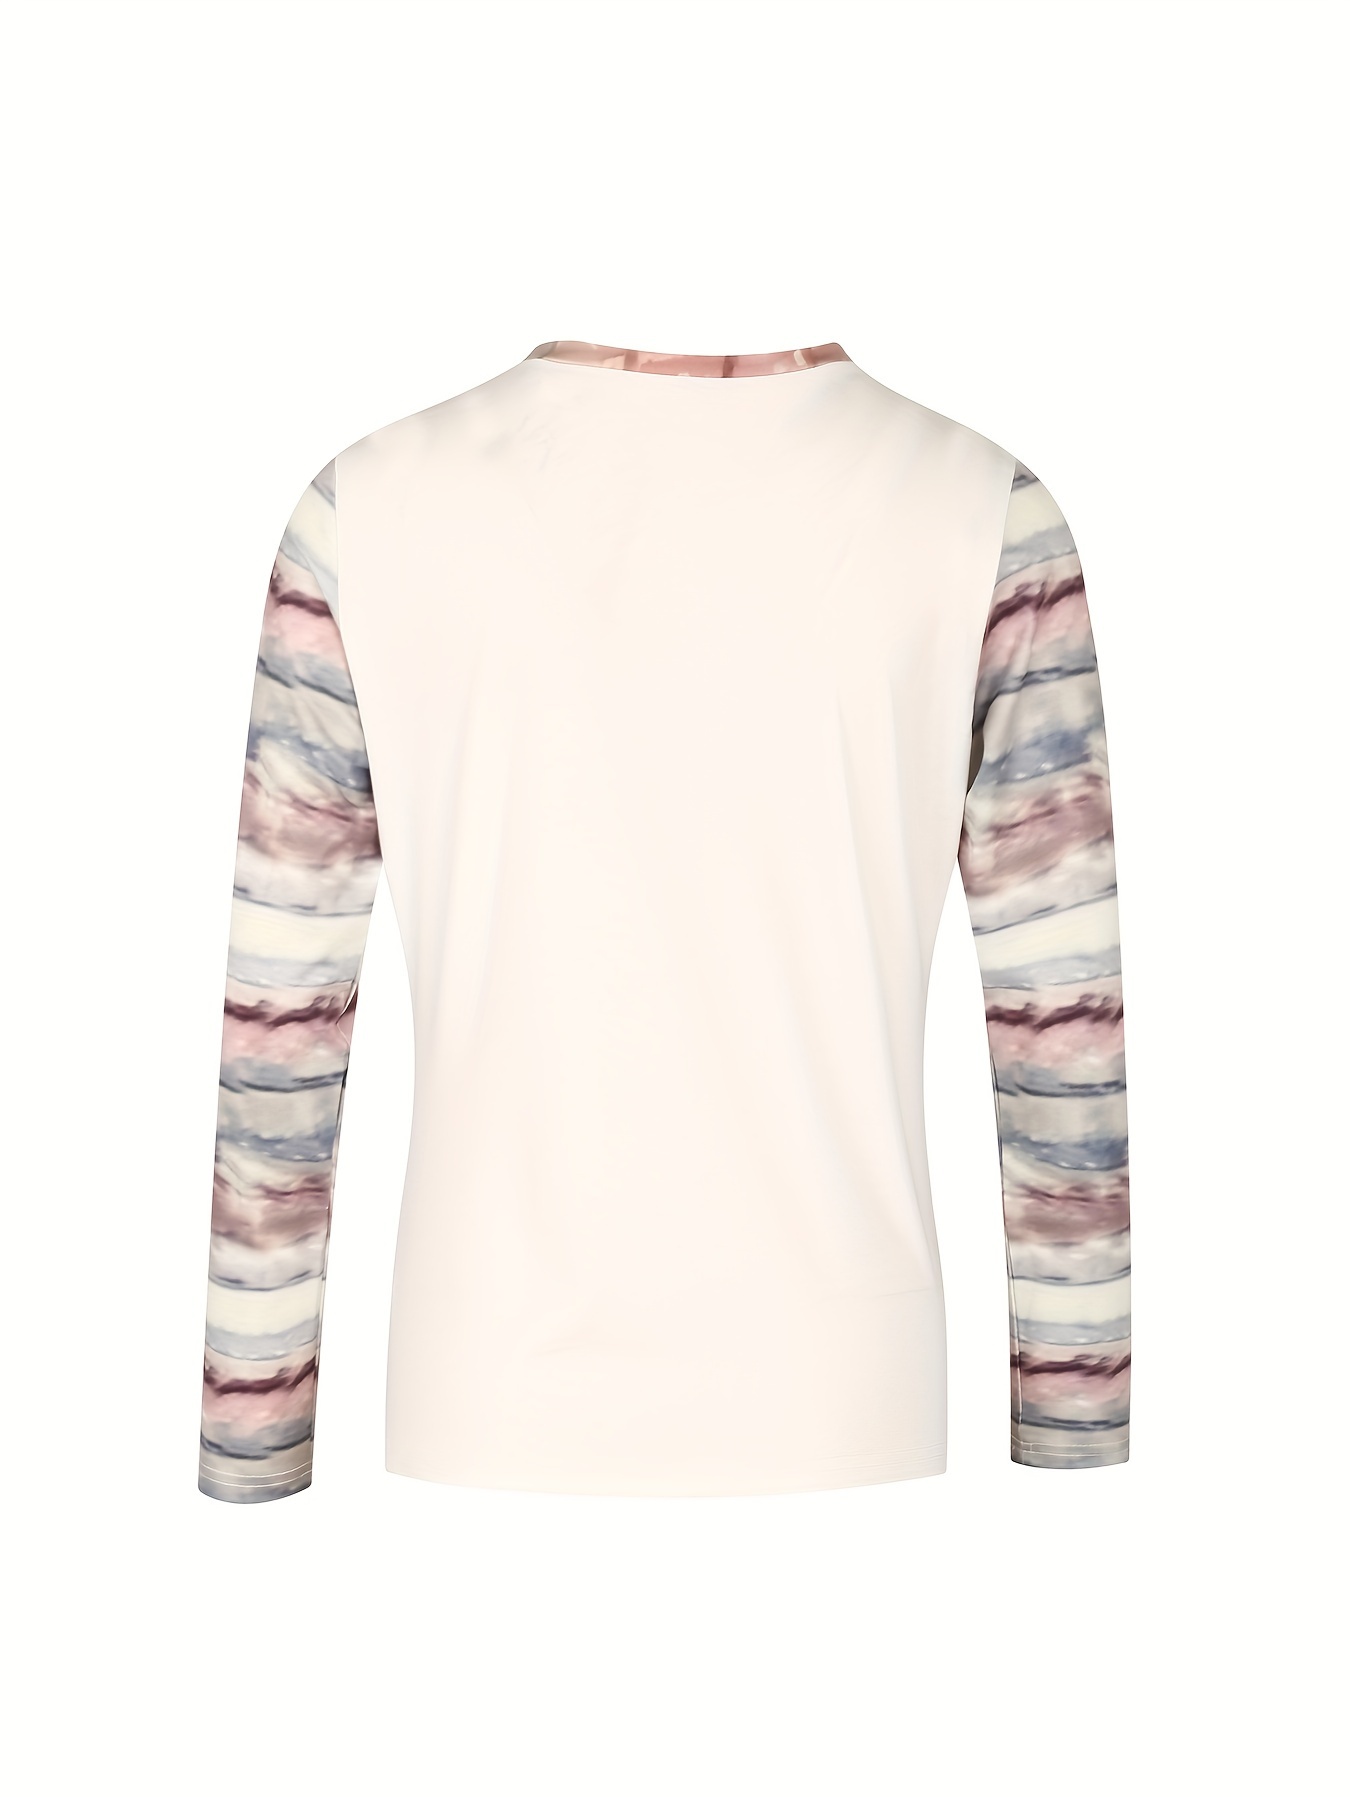 cat print crew neck t shirt causal long sleeve top for spring fall womens clothing details 0